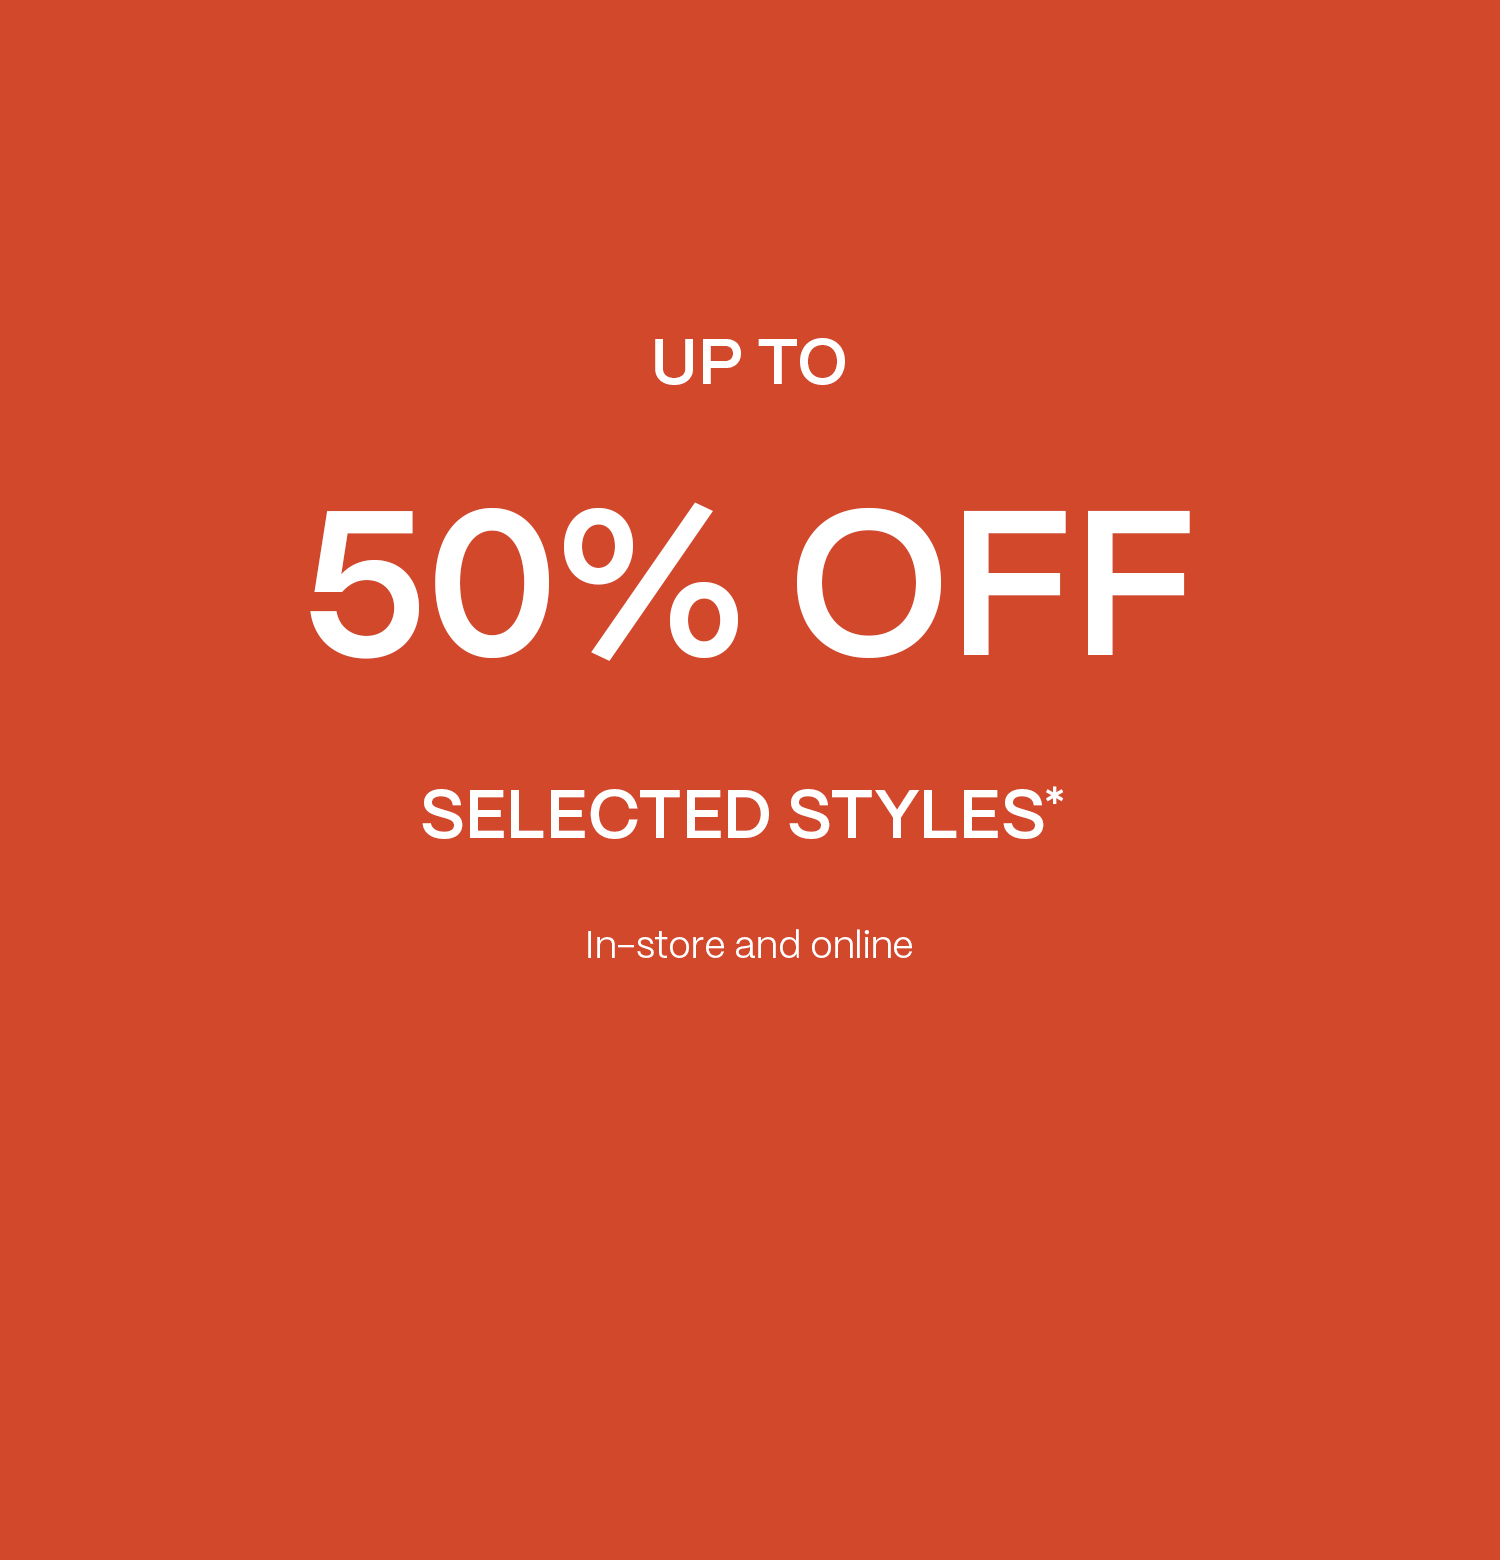 Up To 50% OFF Selected Styles* - Shop Now